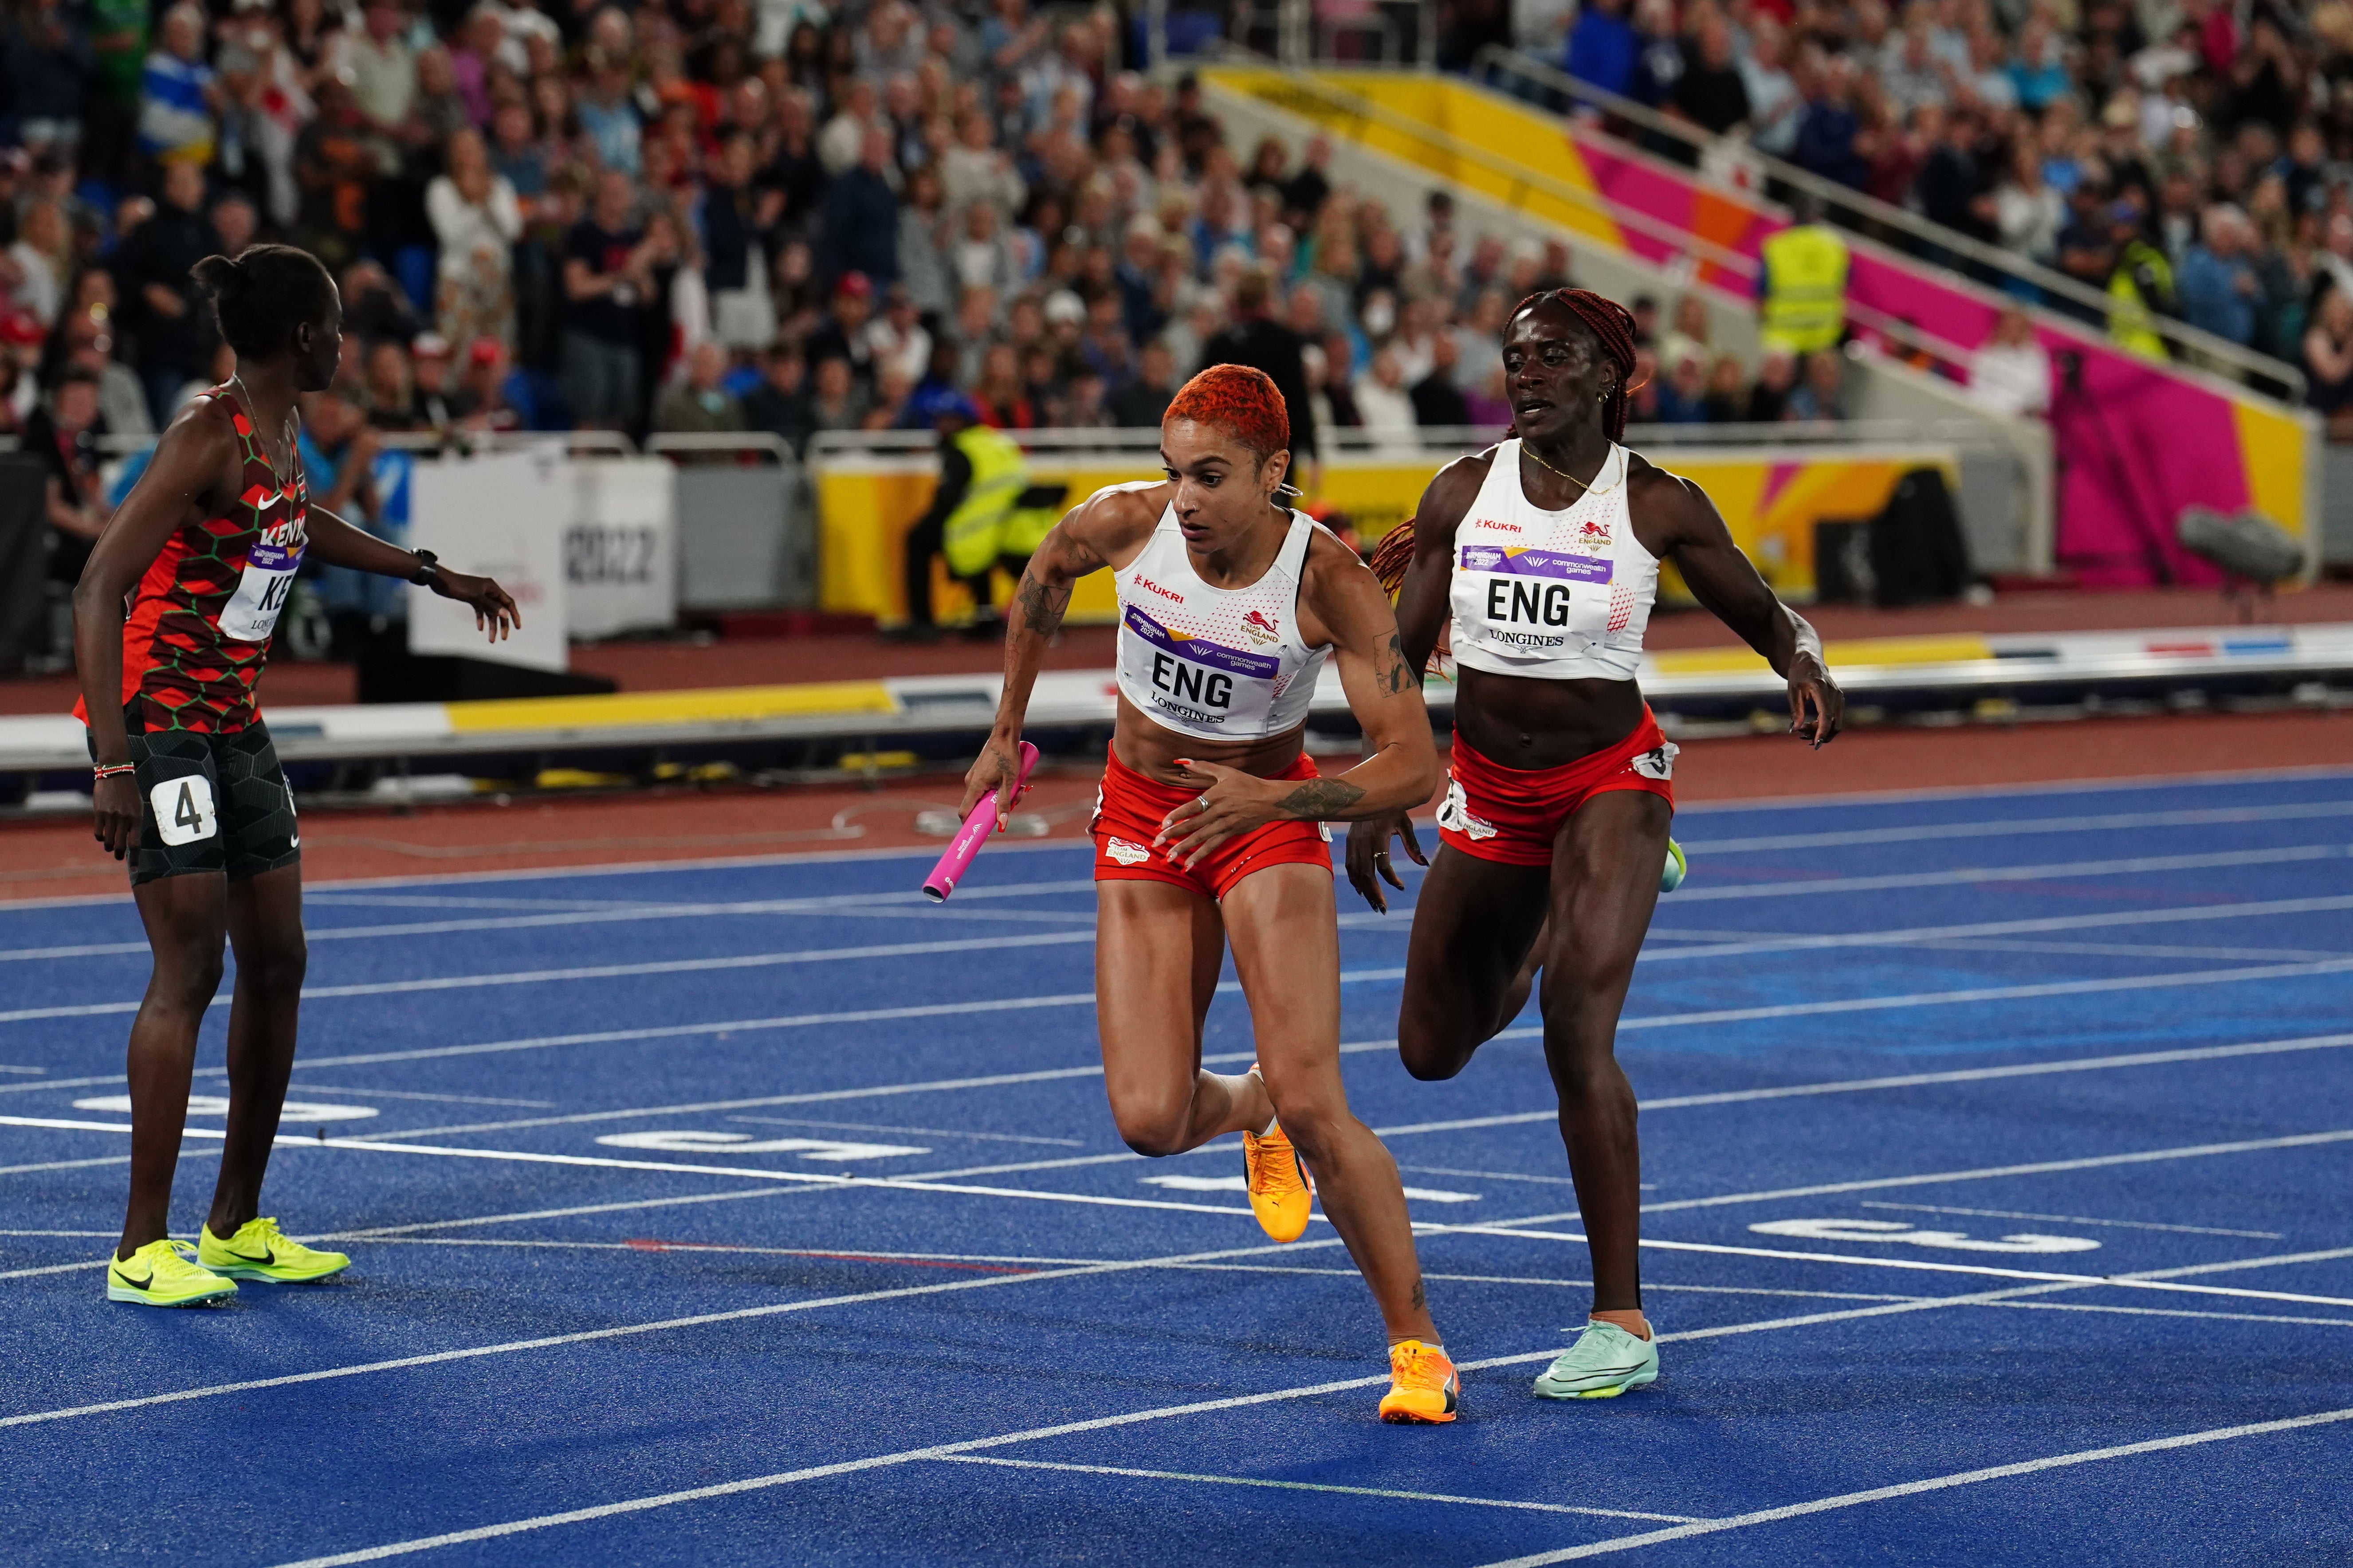 Jodie Williams steps out of lane during the Women’s 400m Final at the 2022 Commonwealth Games in Birmingham (Martin Rickett/PA)